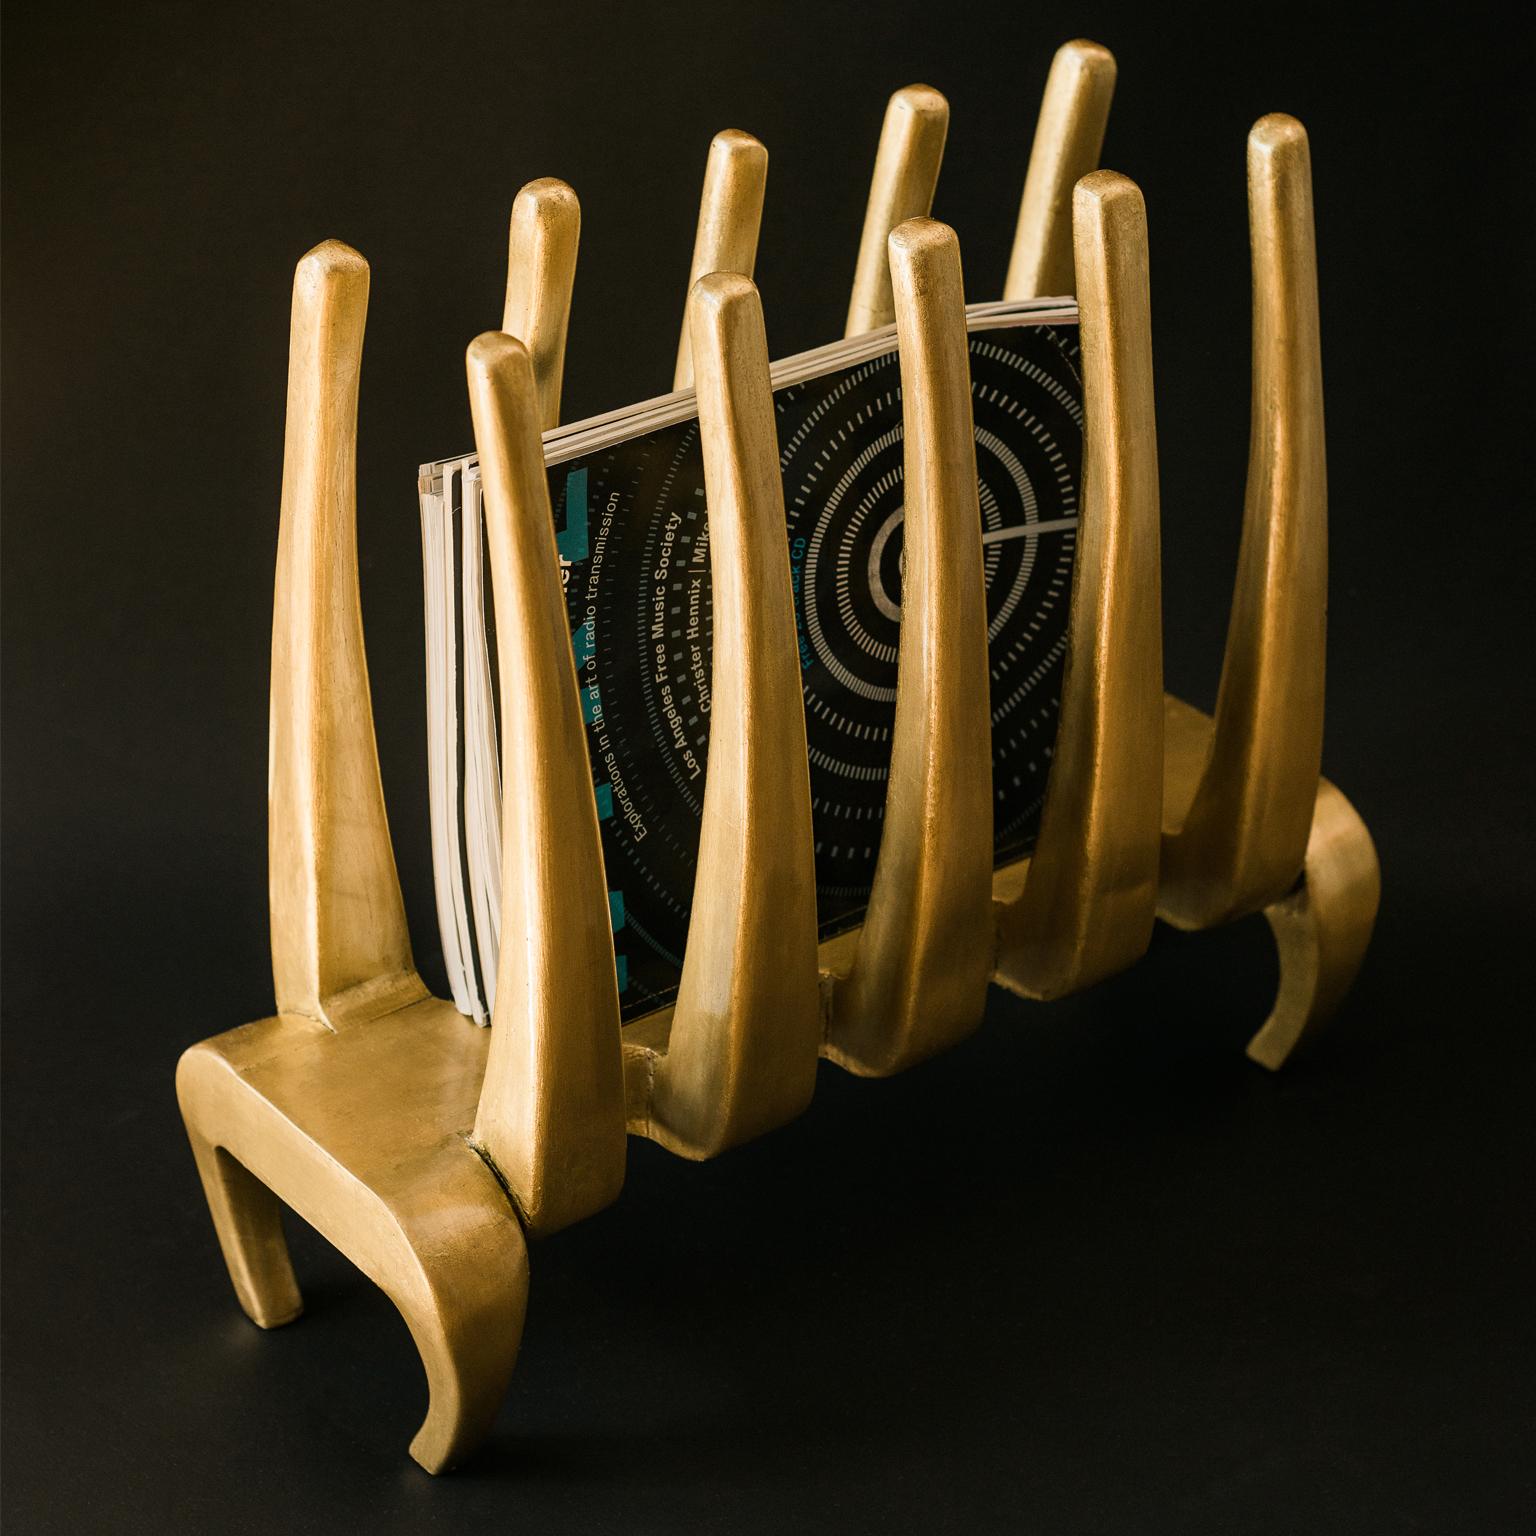 MAA, SCULPTURE MAGAZINE - HOLDER
Hand made in red pine solid wood (from sustainably managed national forests). Carefully selected, hand cut, planed, carved and assembled in our workshop. Gold leaf hand finished using traditional methods. The acid